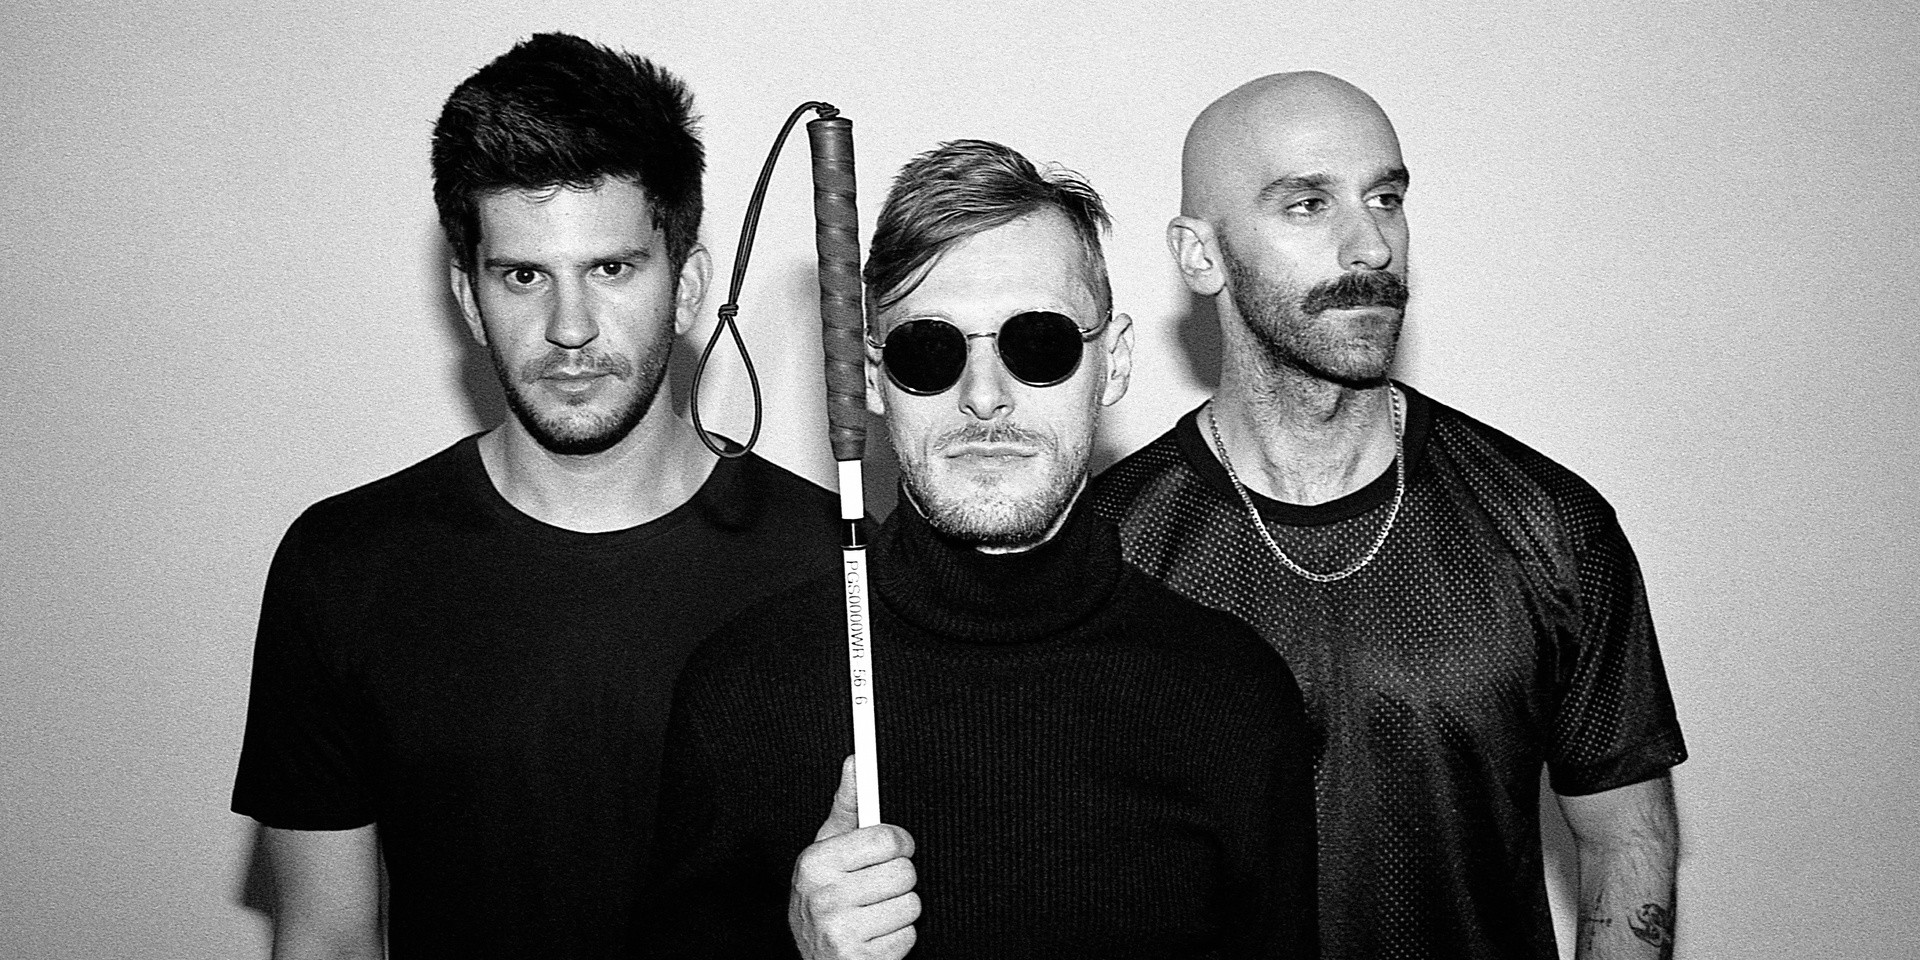 X Ambassadors will arrive in Singapore next February for The ORION tour 